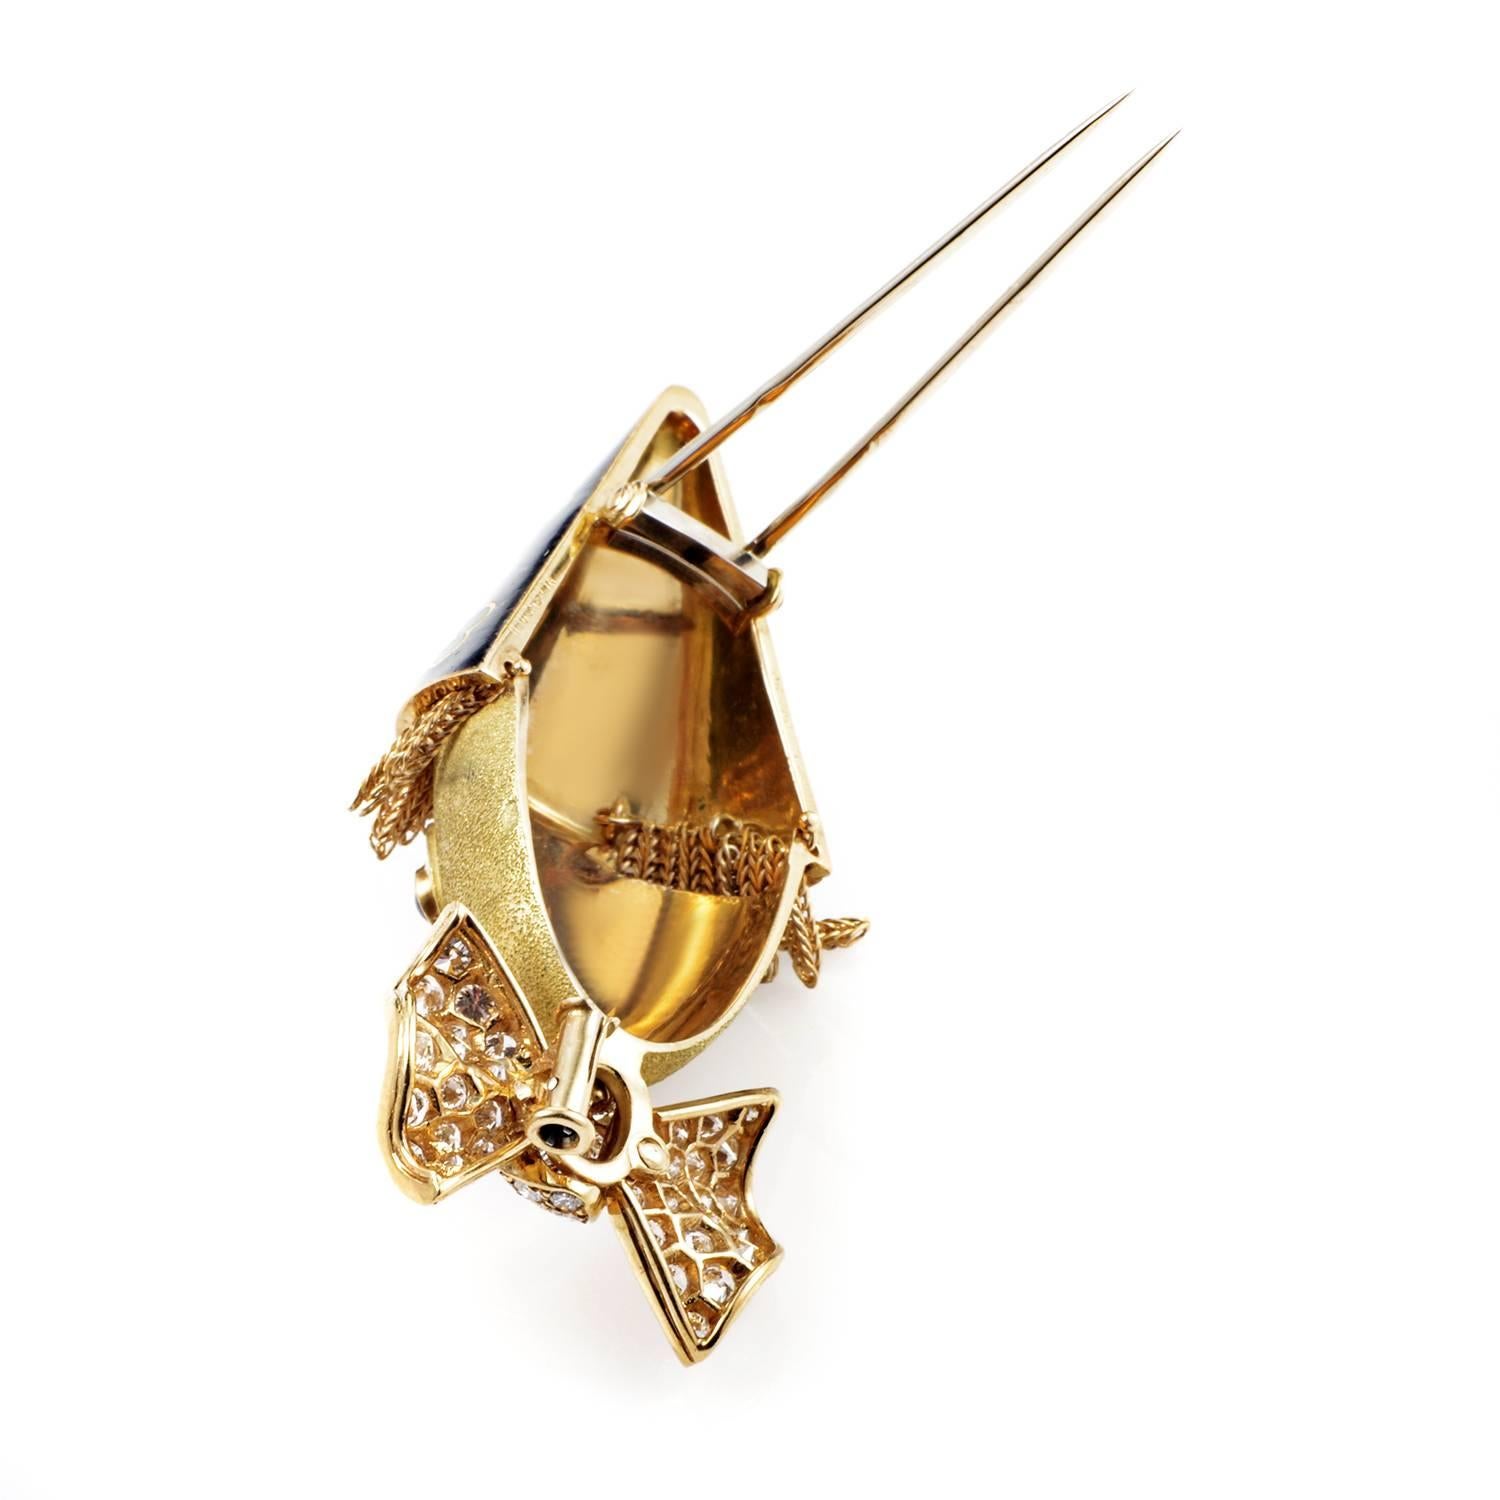 A refreshing and adorable design employing the ever-appealing motif of a clown, this lovely pin from Boucheron is made of prestigious 18K yellow gold and adorned with glittering diamonds totaling approximately 2.00 carats as well as two nifty